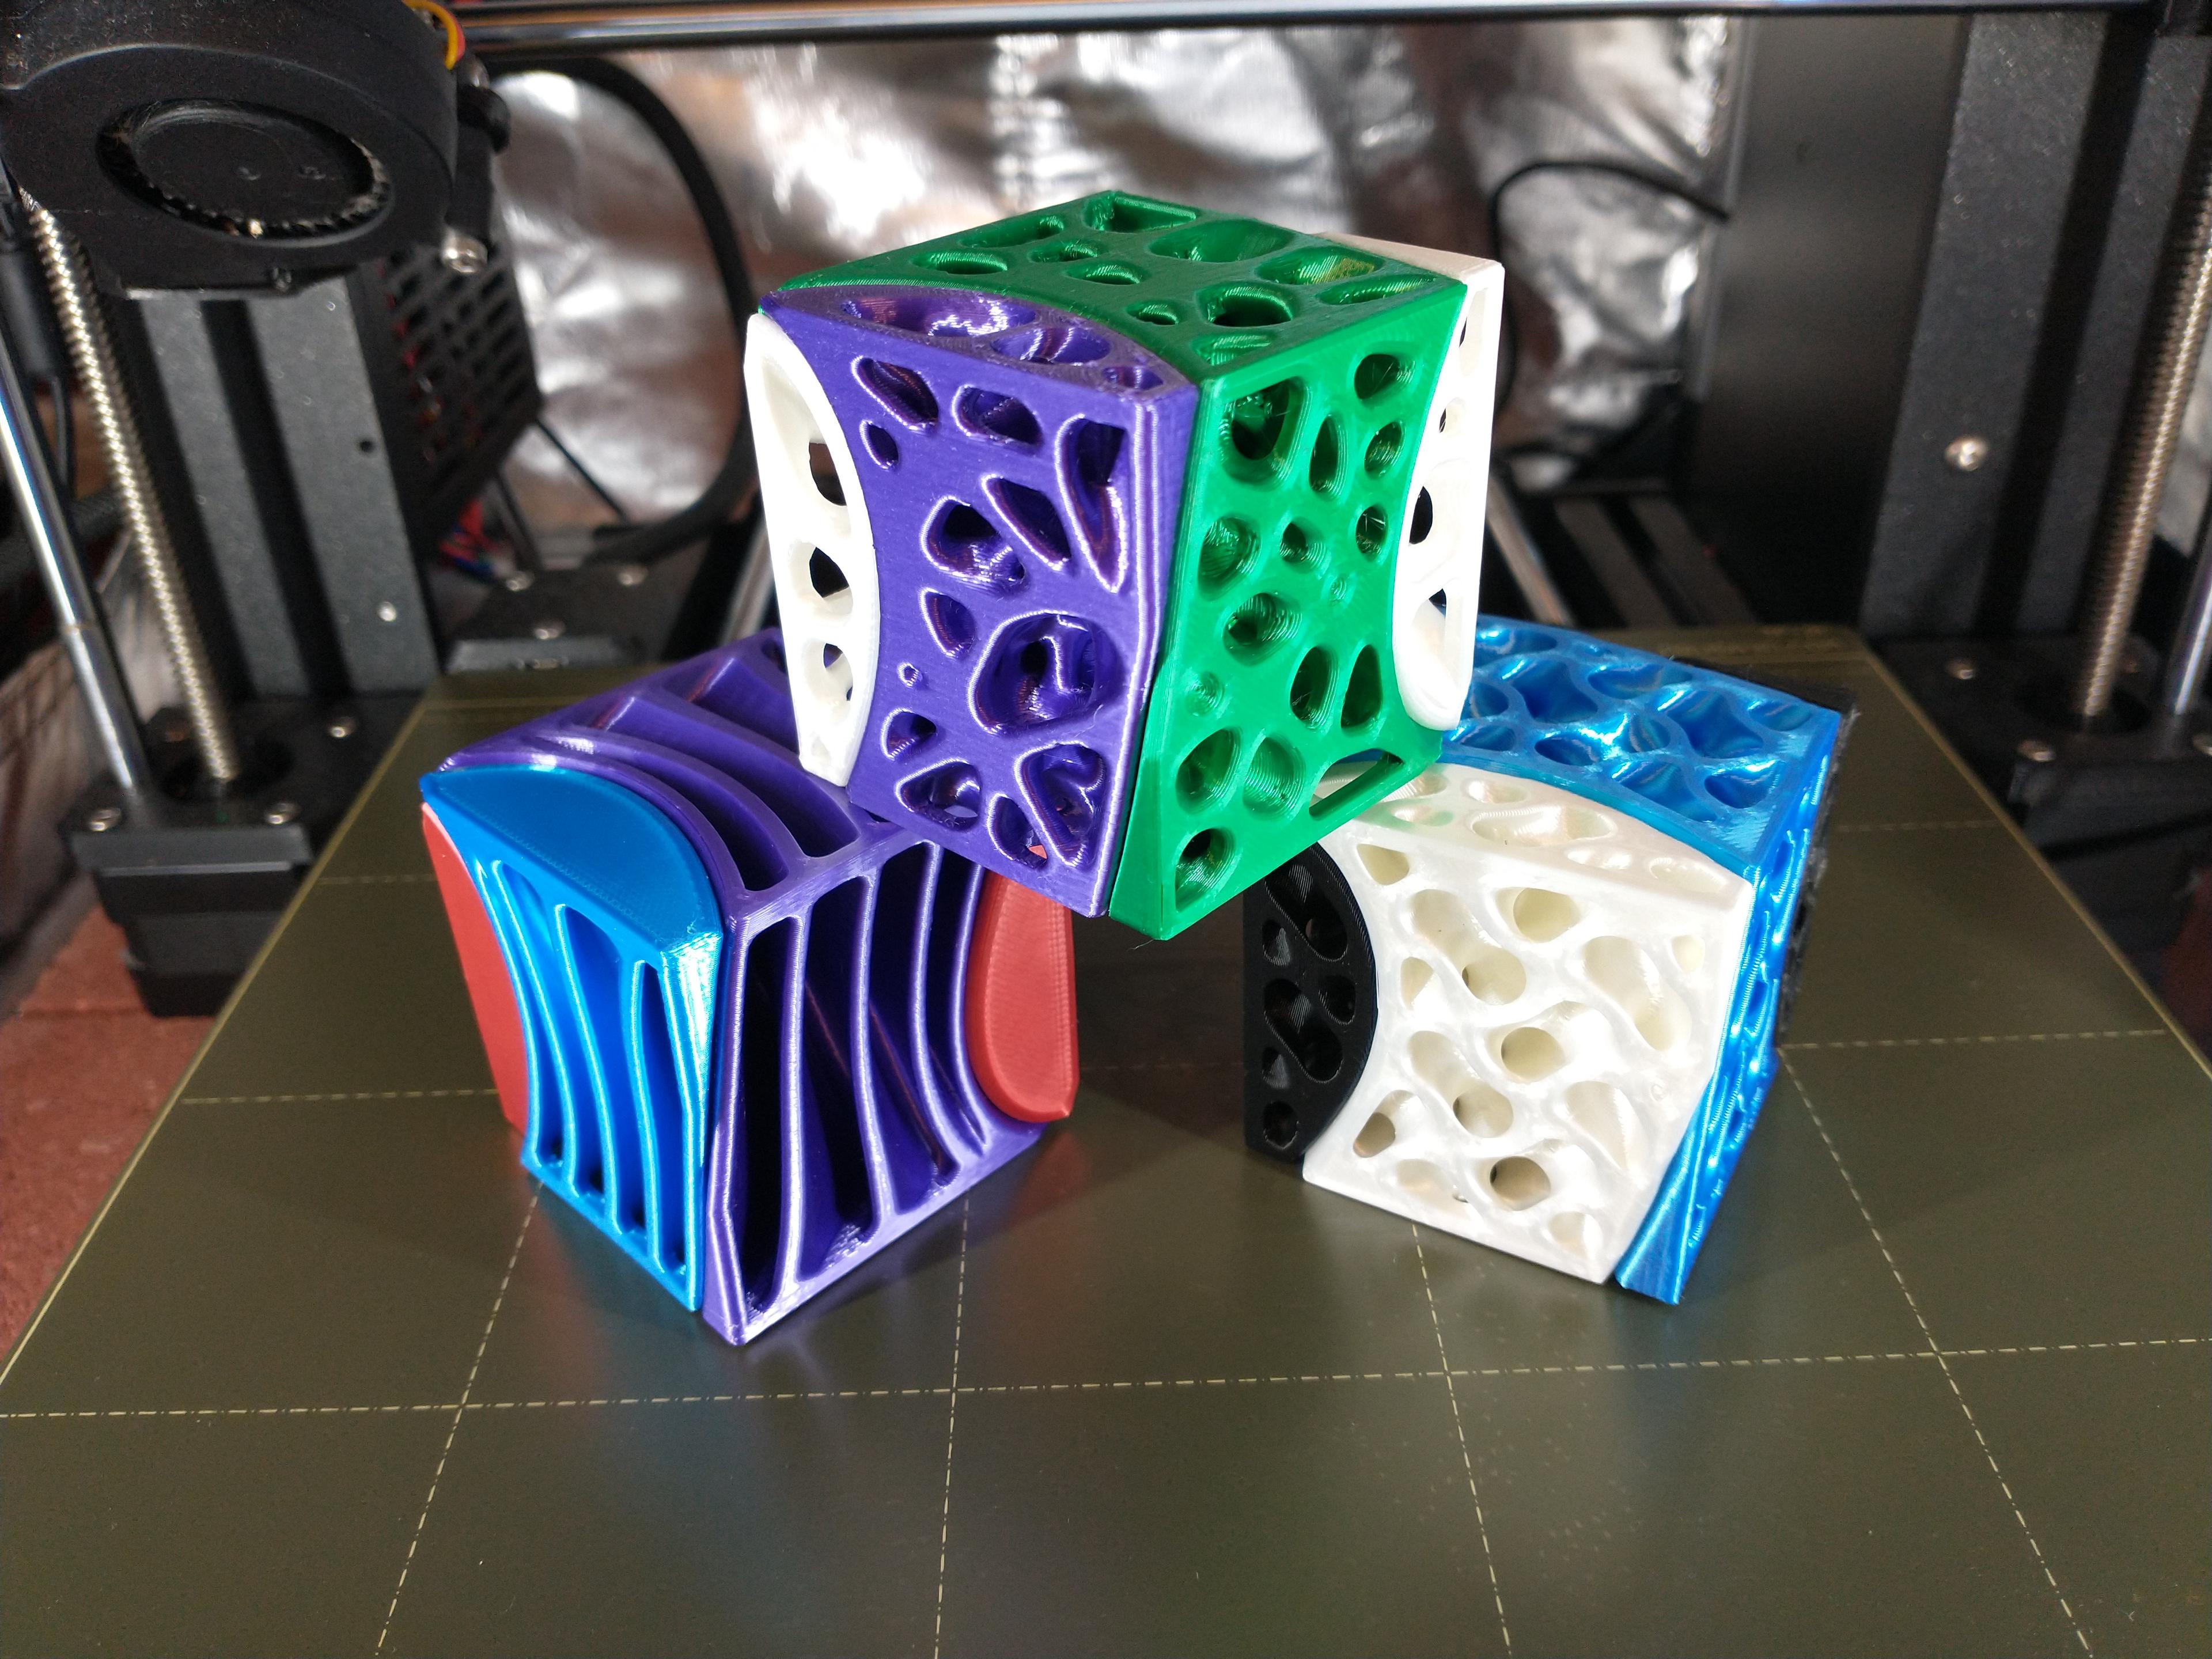 Triple Twist Cube (Gills) - Gills, Stochastic and Gyroid Cubes - 3d model